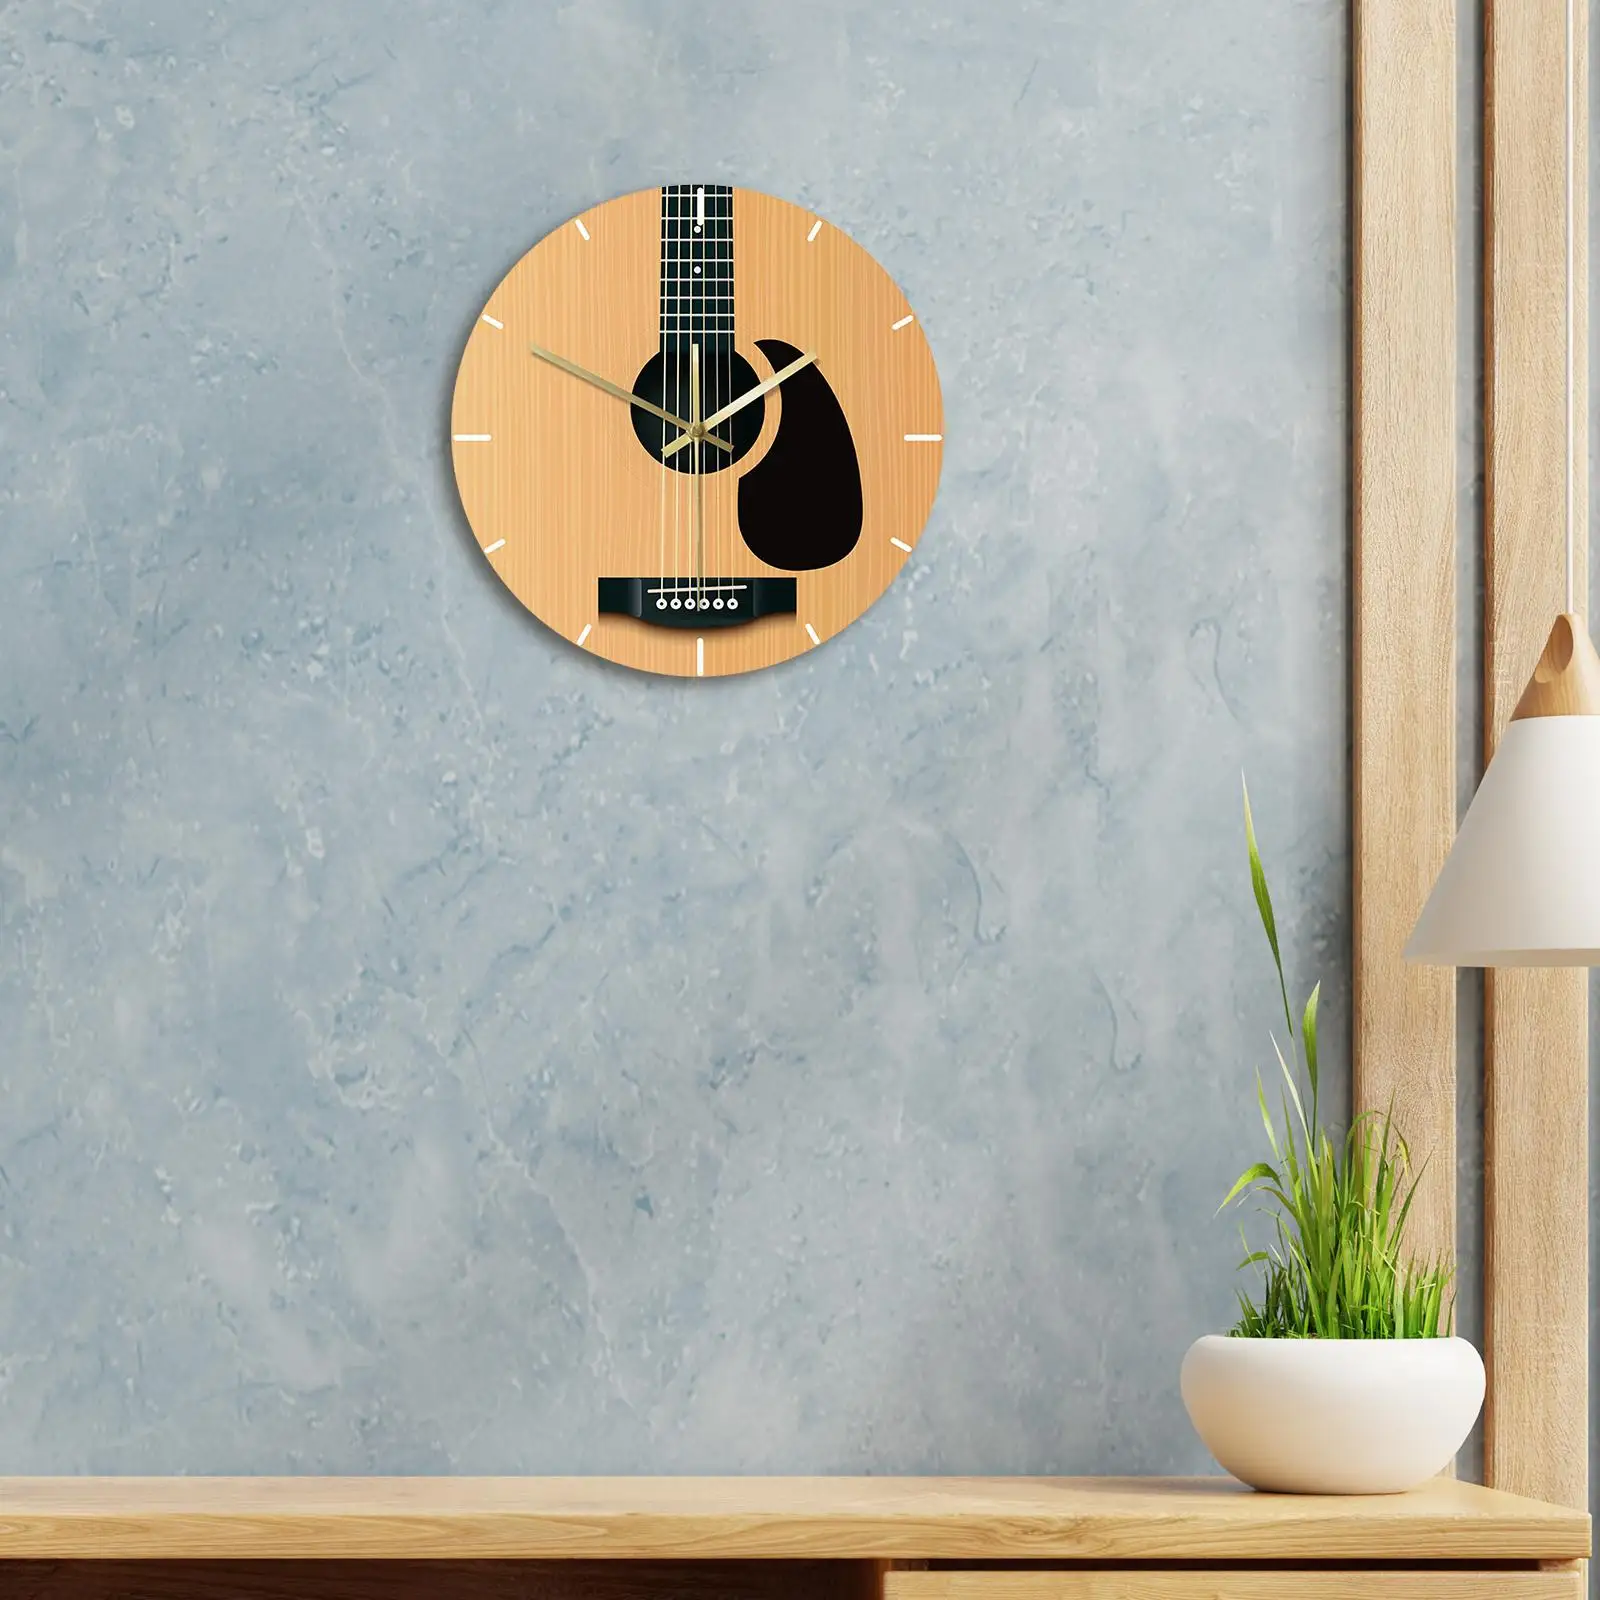 Nordic Guitar Wall Clock Music Instrument 12 inch Home Decor Minimalist Wall Art No Ticking for Office